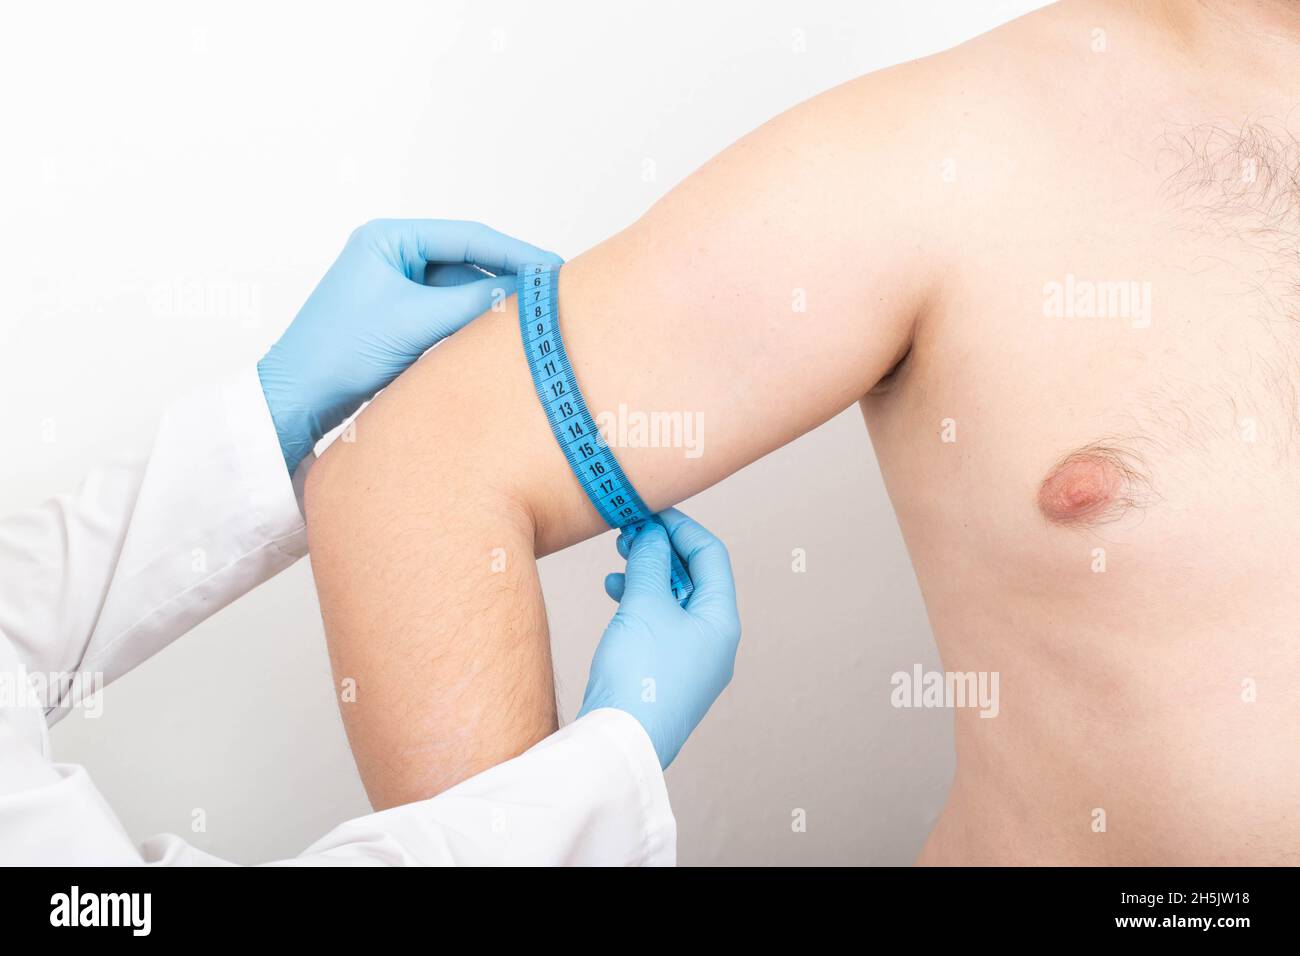 Doctor measures a man's triceps with a measuring tape for triceps augmentation with cosmetic surgery, manipulation Stock Photo